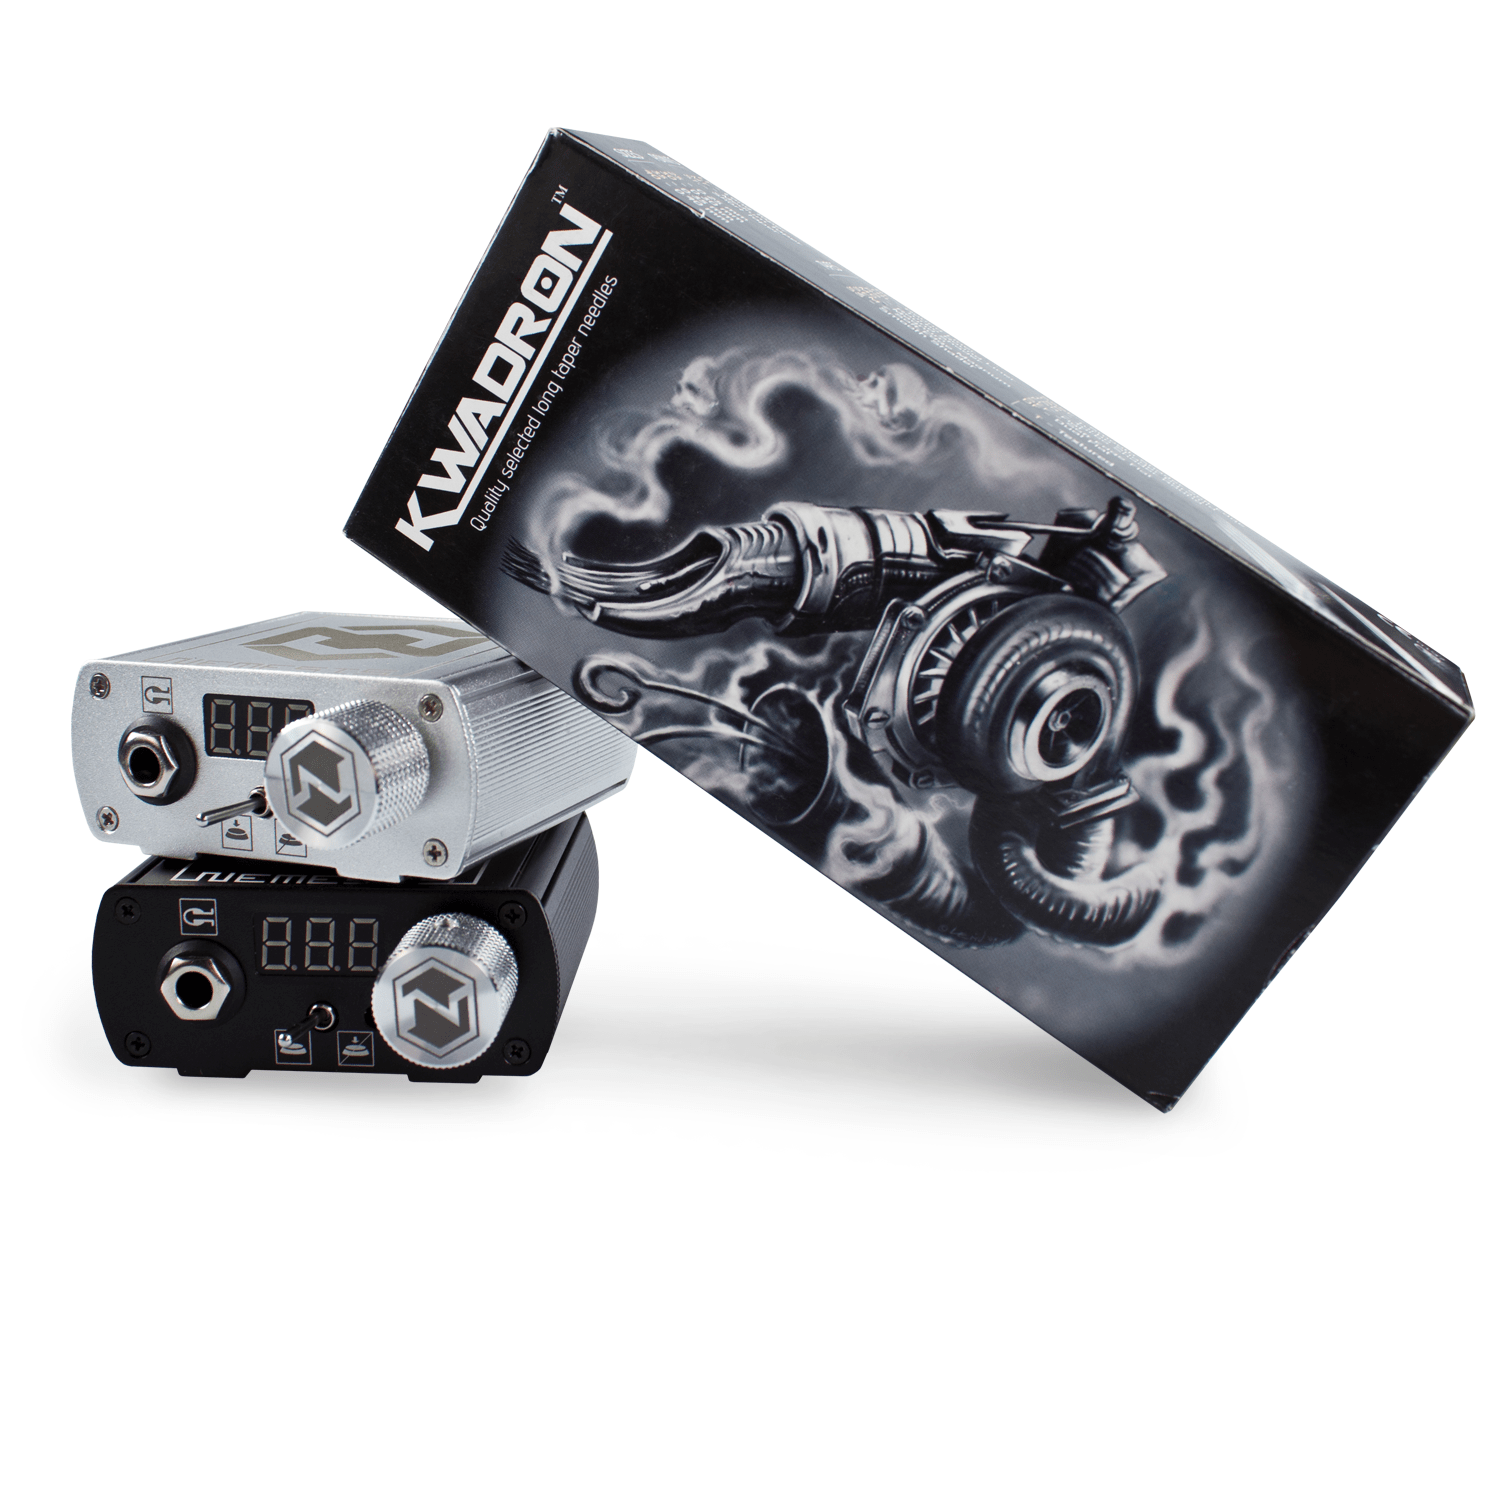 Nemesis Professional Tattoo Power Supply in Black by Kwadron Black and Silver 1